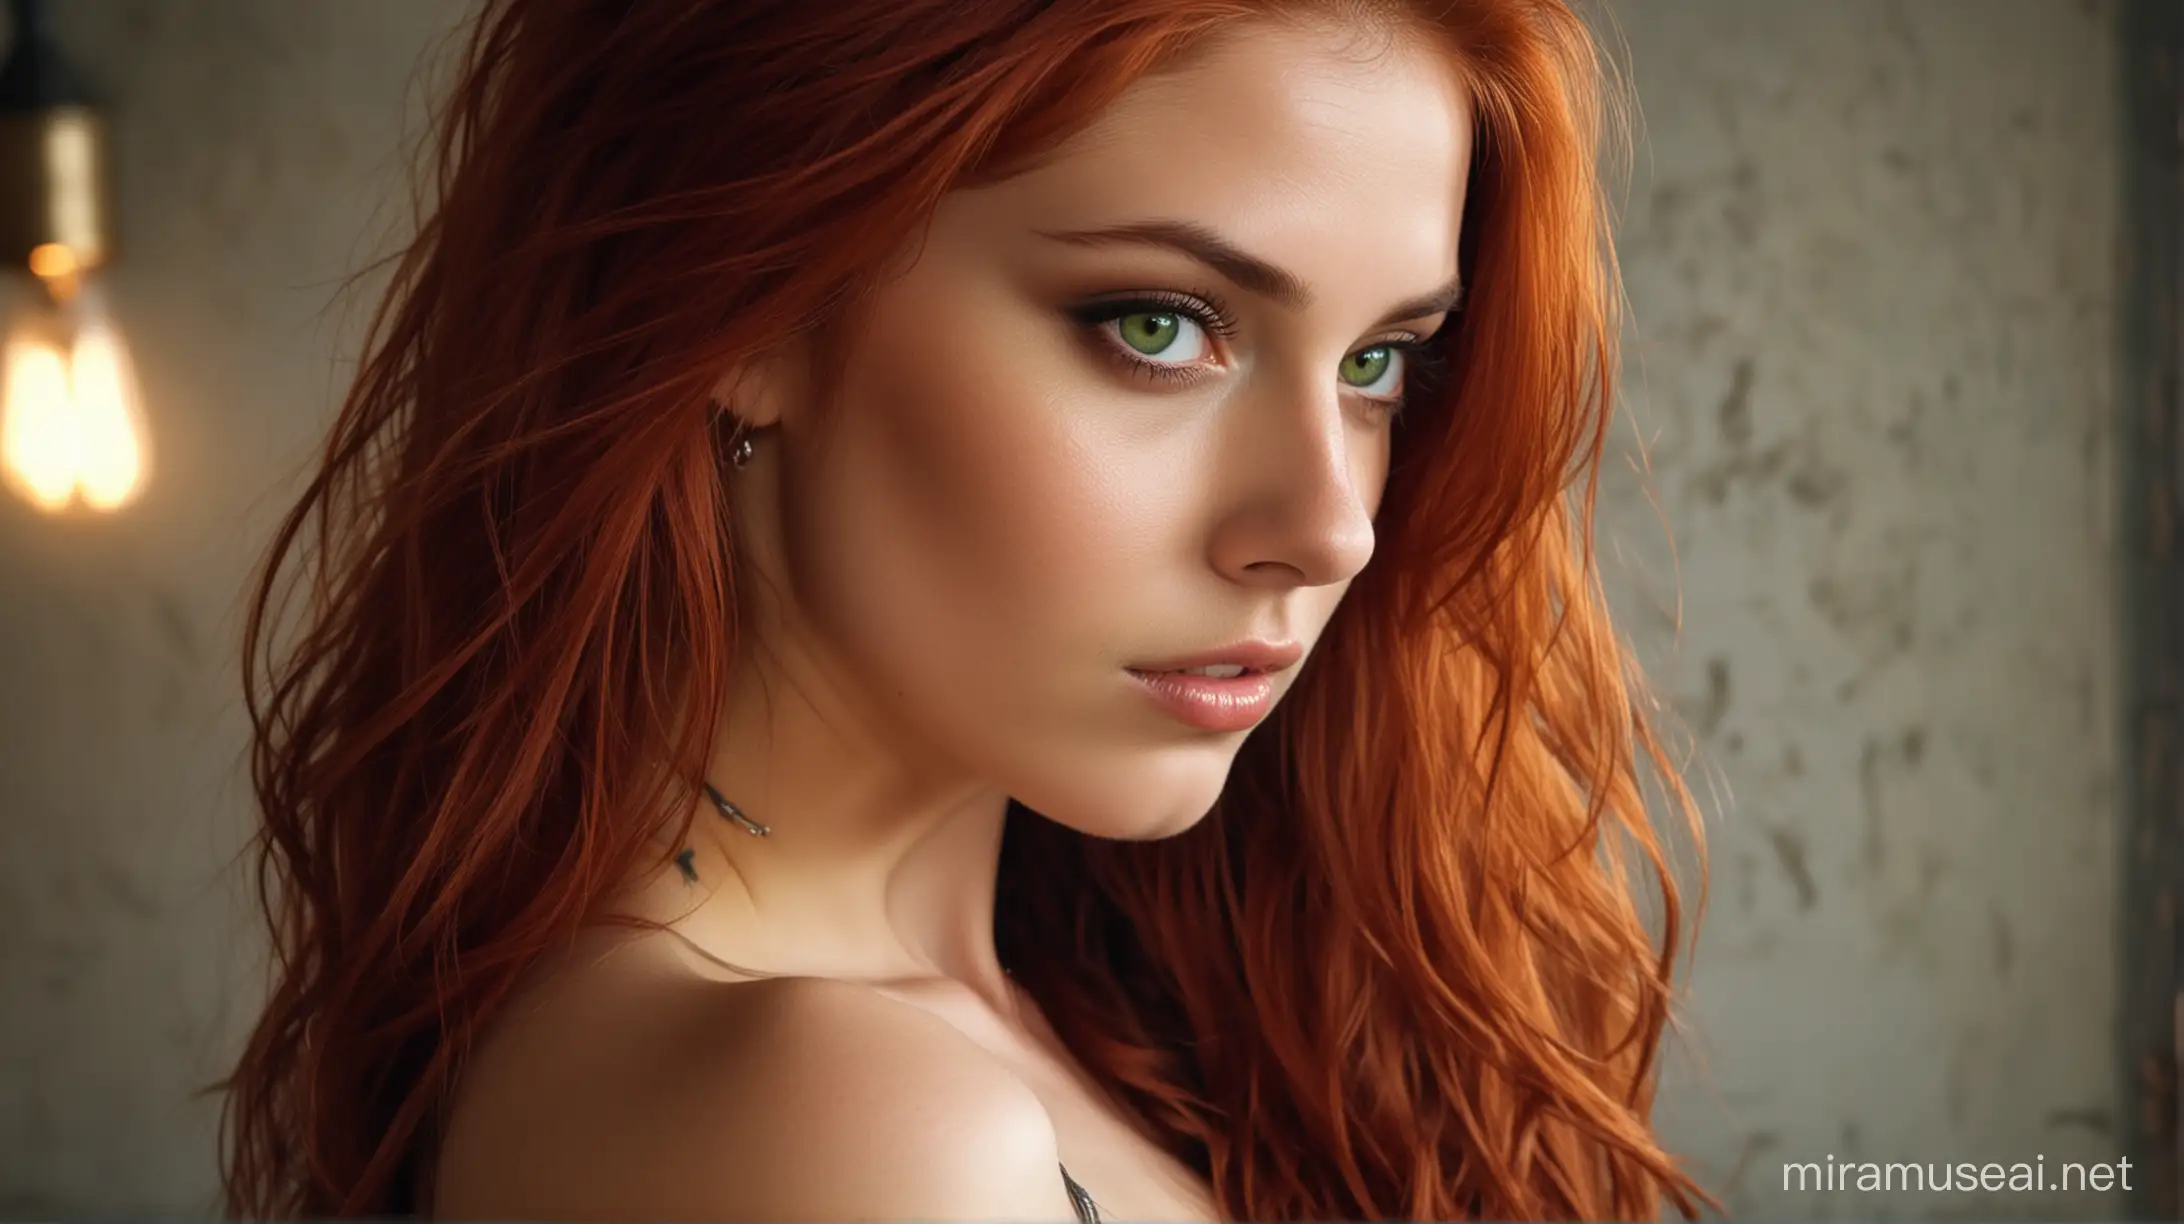 Passionate Moment Fiery RedHaired Woman in Romantic Embrace